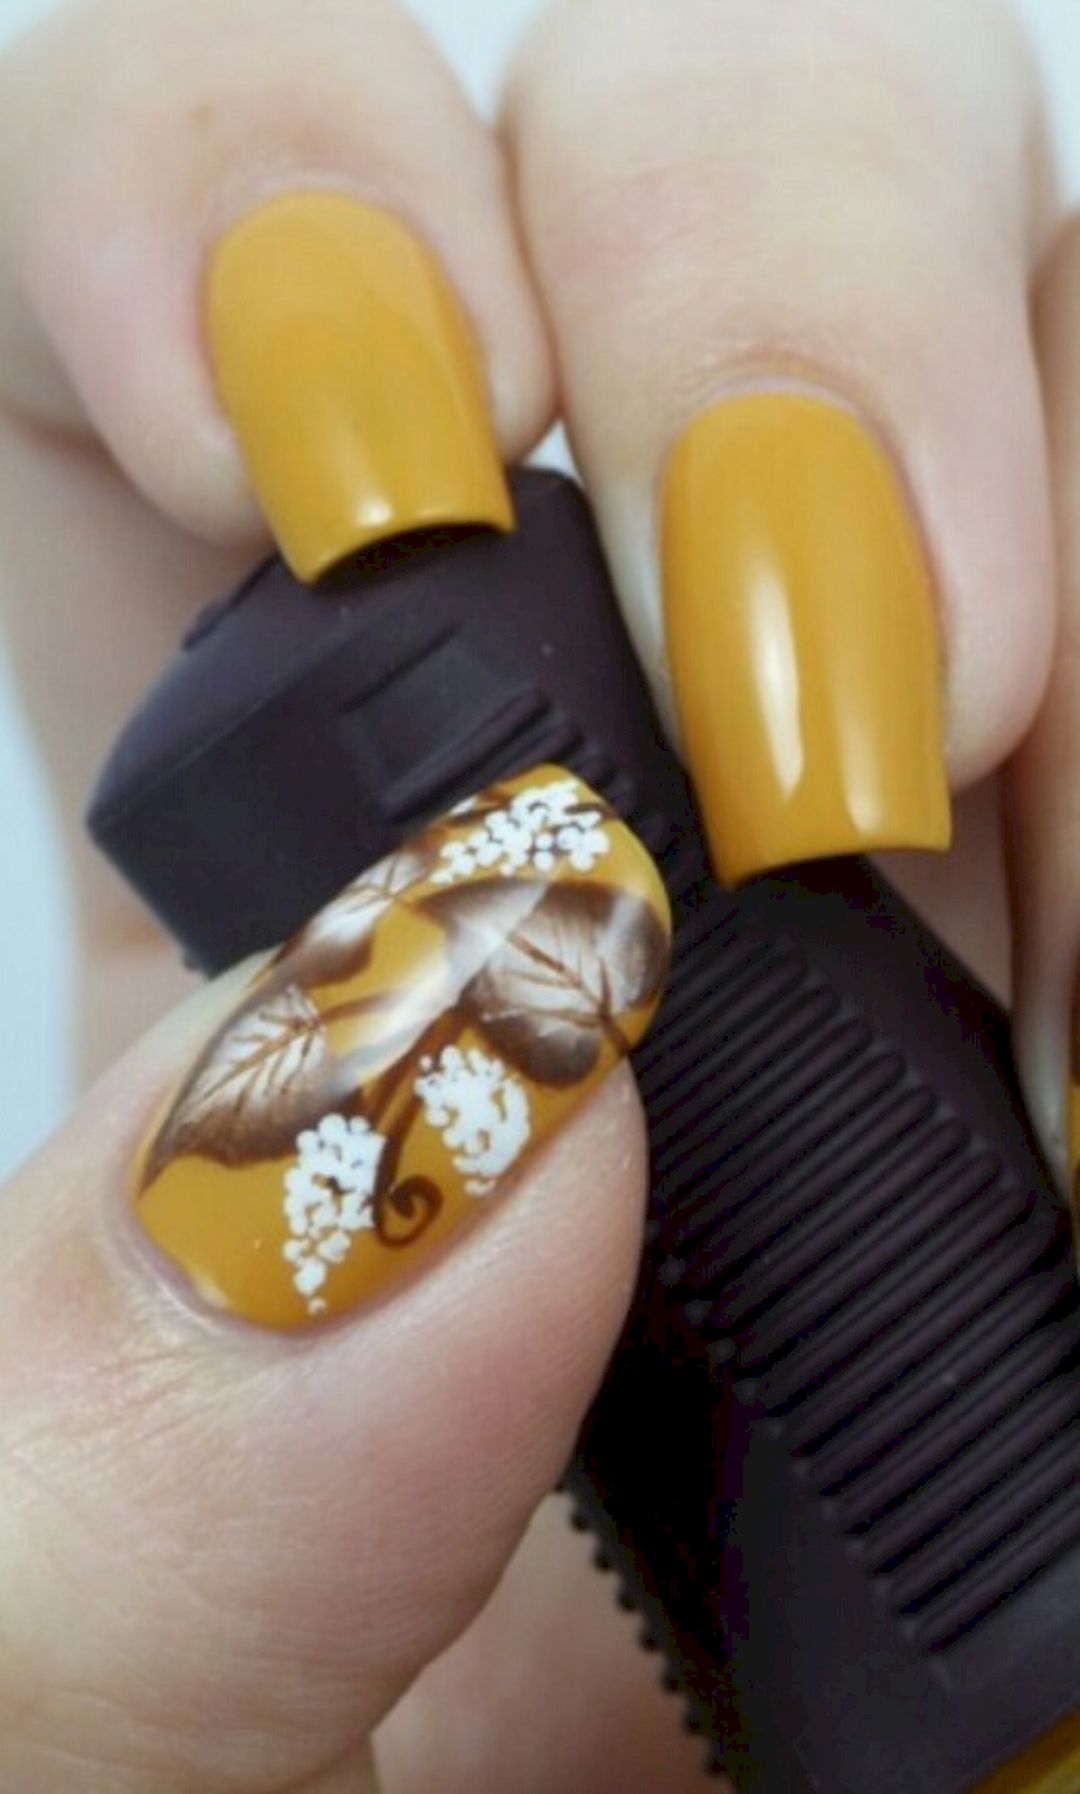 Beauty maple leaf nail art from musely